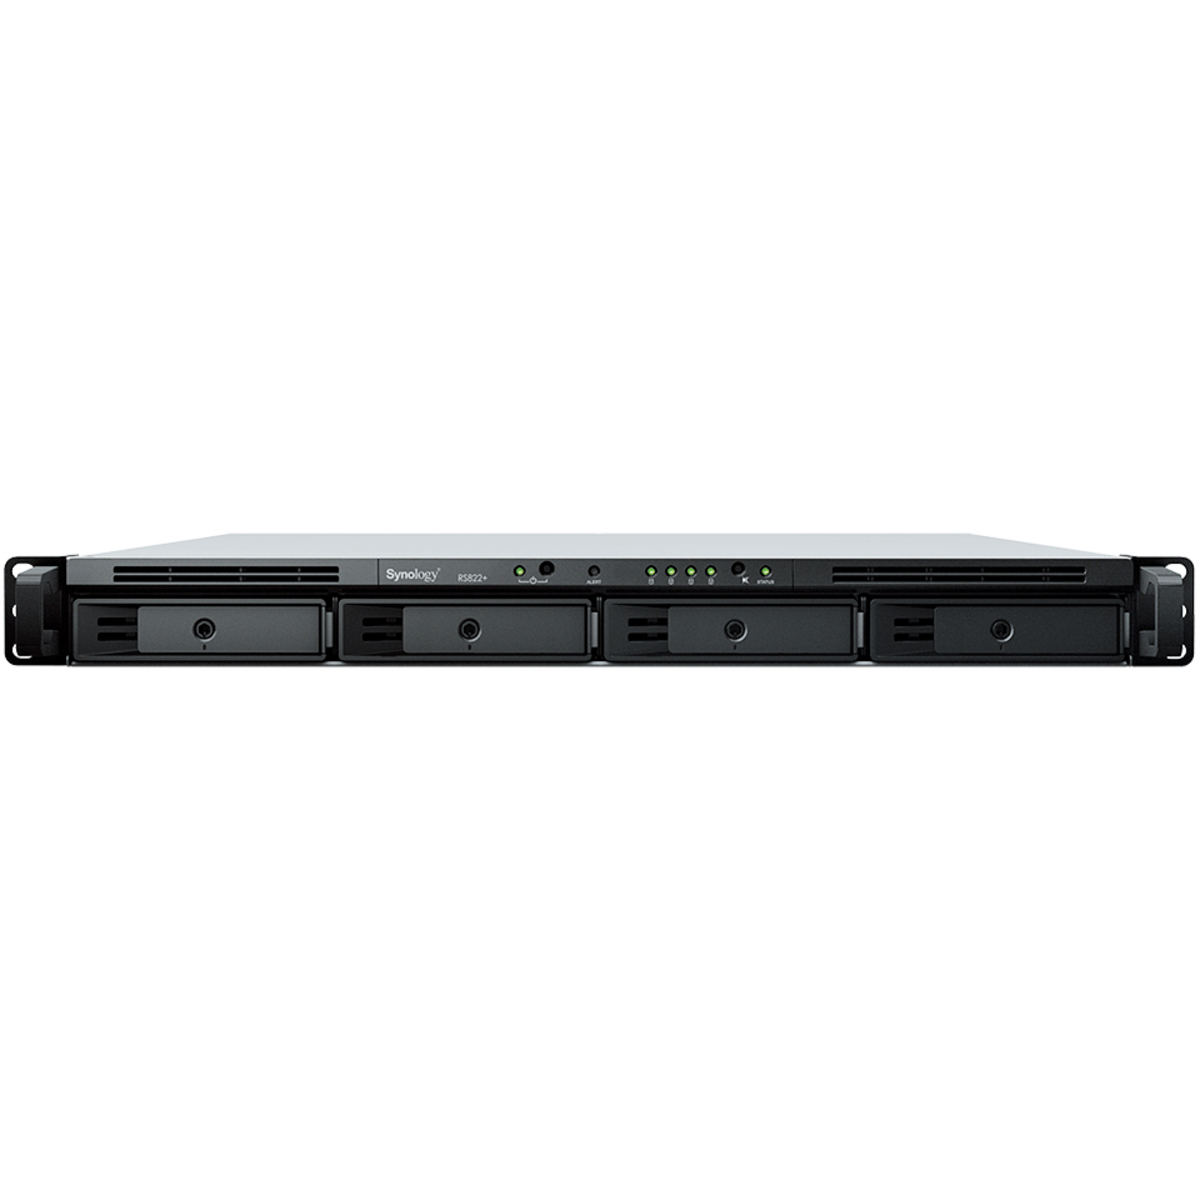 buy $2582 Synology RackStation RS822+ 80tb RackMount NAS - Network Attached Storage Device 4x20000gb Seagate EXOS X20 ST20000NM007D 3.5 7200rpm SATA 6Gb/s HDD ENTERPRISE Class Drives Installed - Burn-In Tested - nas headquarters buy network attached storage server device das new raid-5 free shipping usa RackStation RS822+